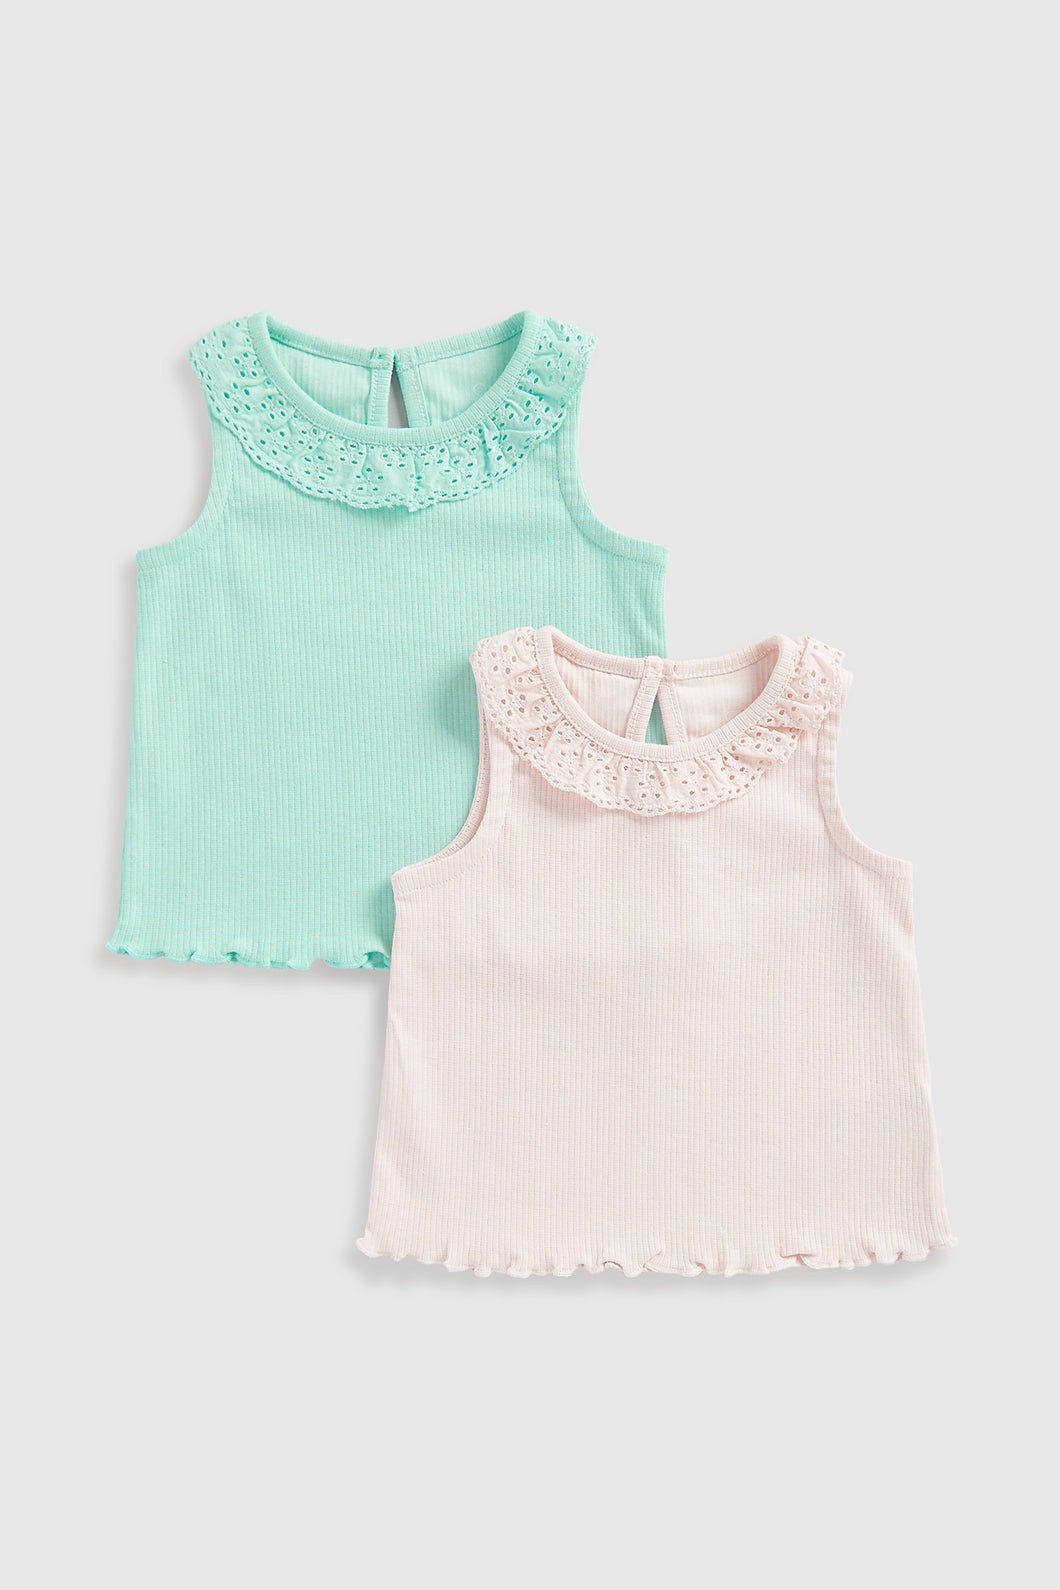 Mothercare Sleeveless Vest T-Shirts - 2 Pack